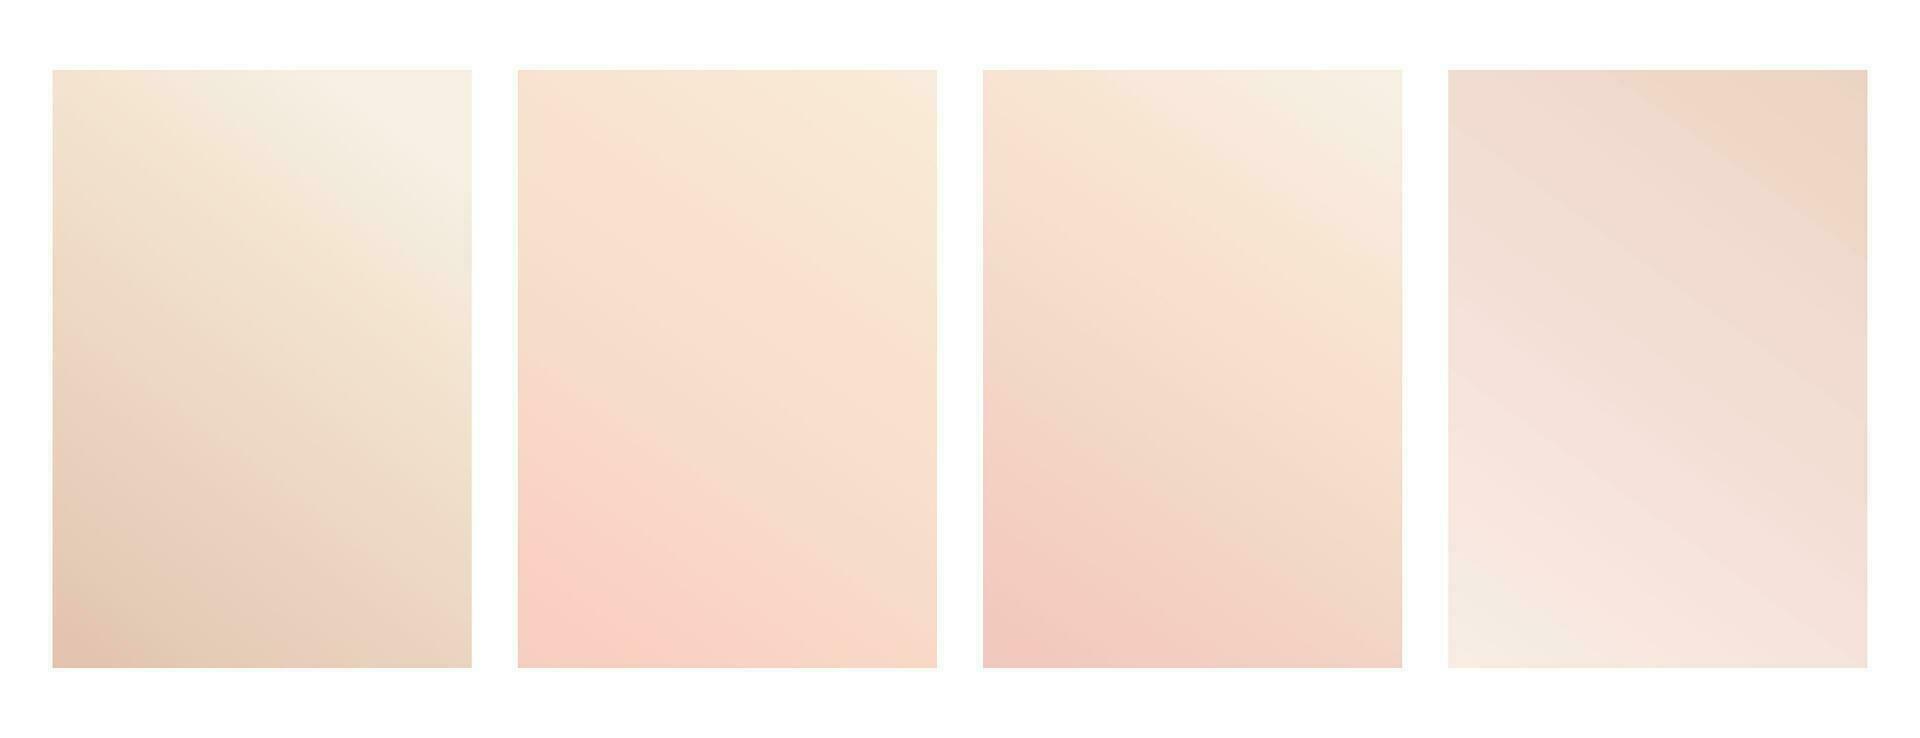 Nude gradient. Set of posters with gradation of warm beige shades. Pastel colors for design vector